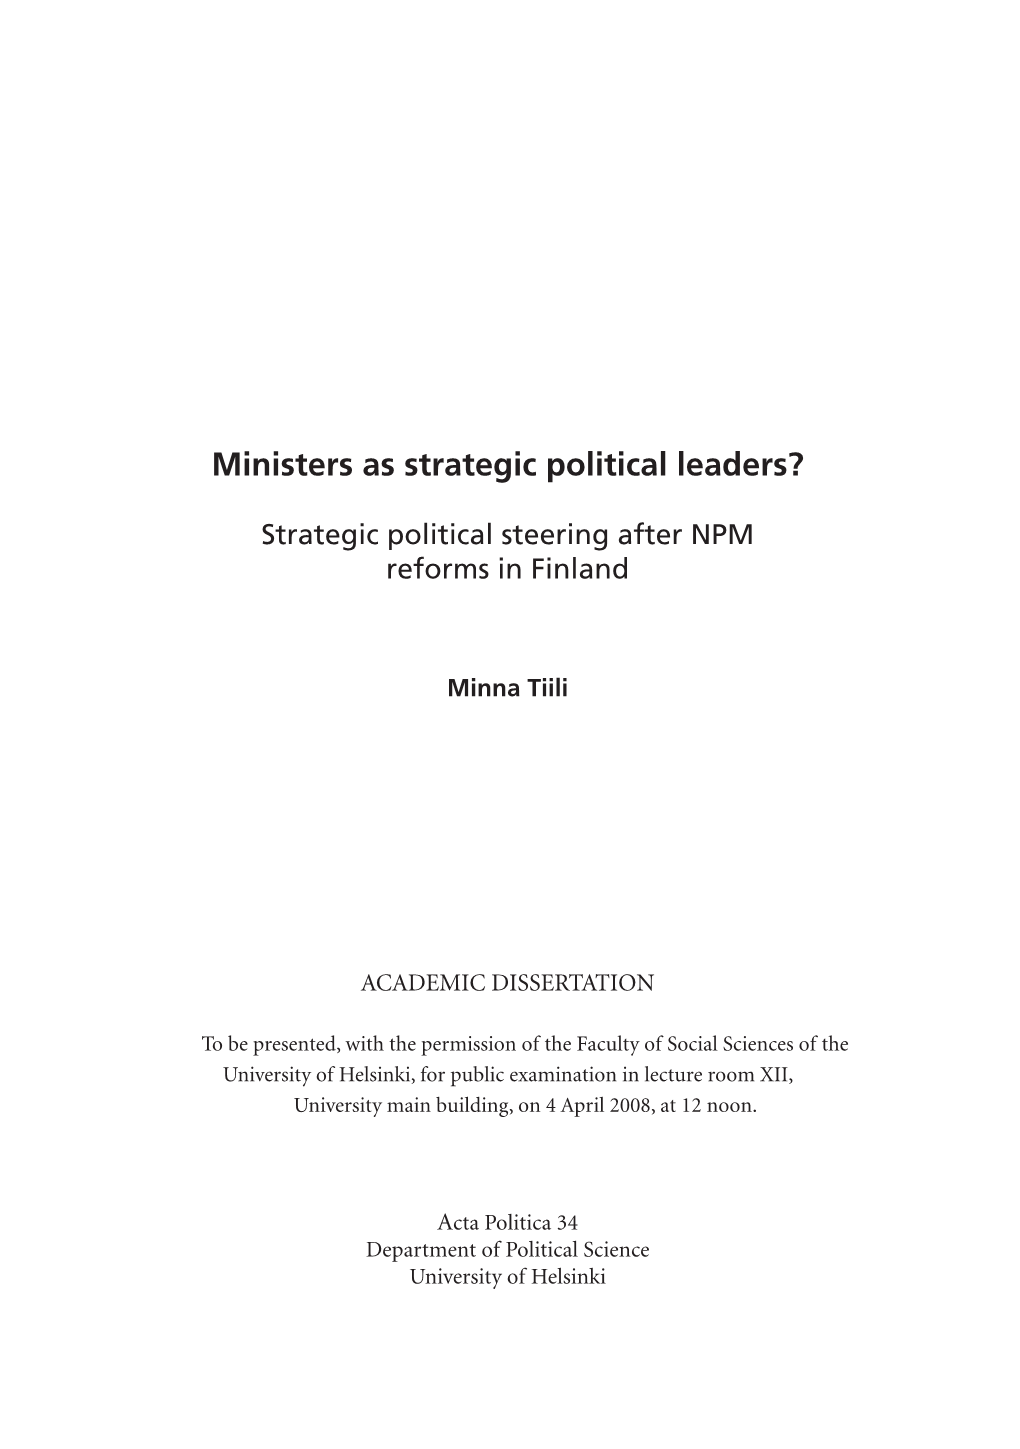 Ministers As Strategic Political Leaders?